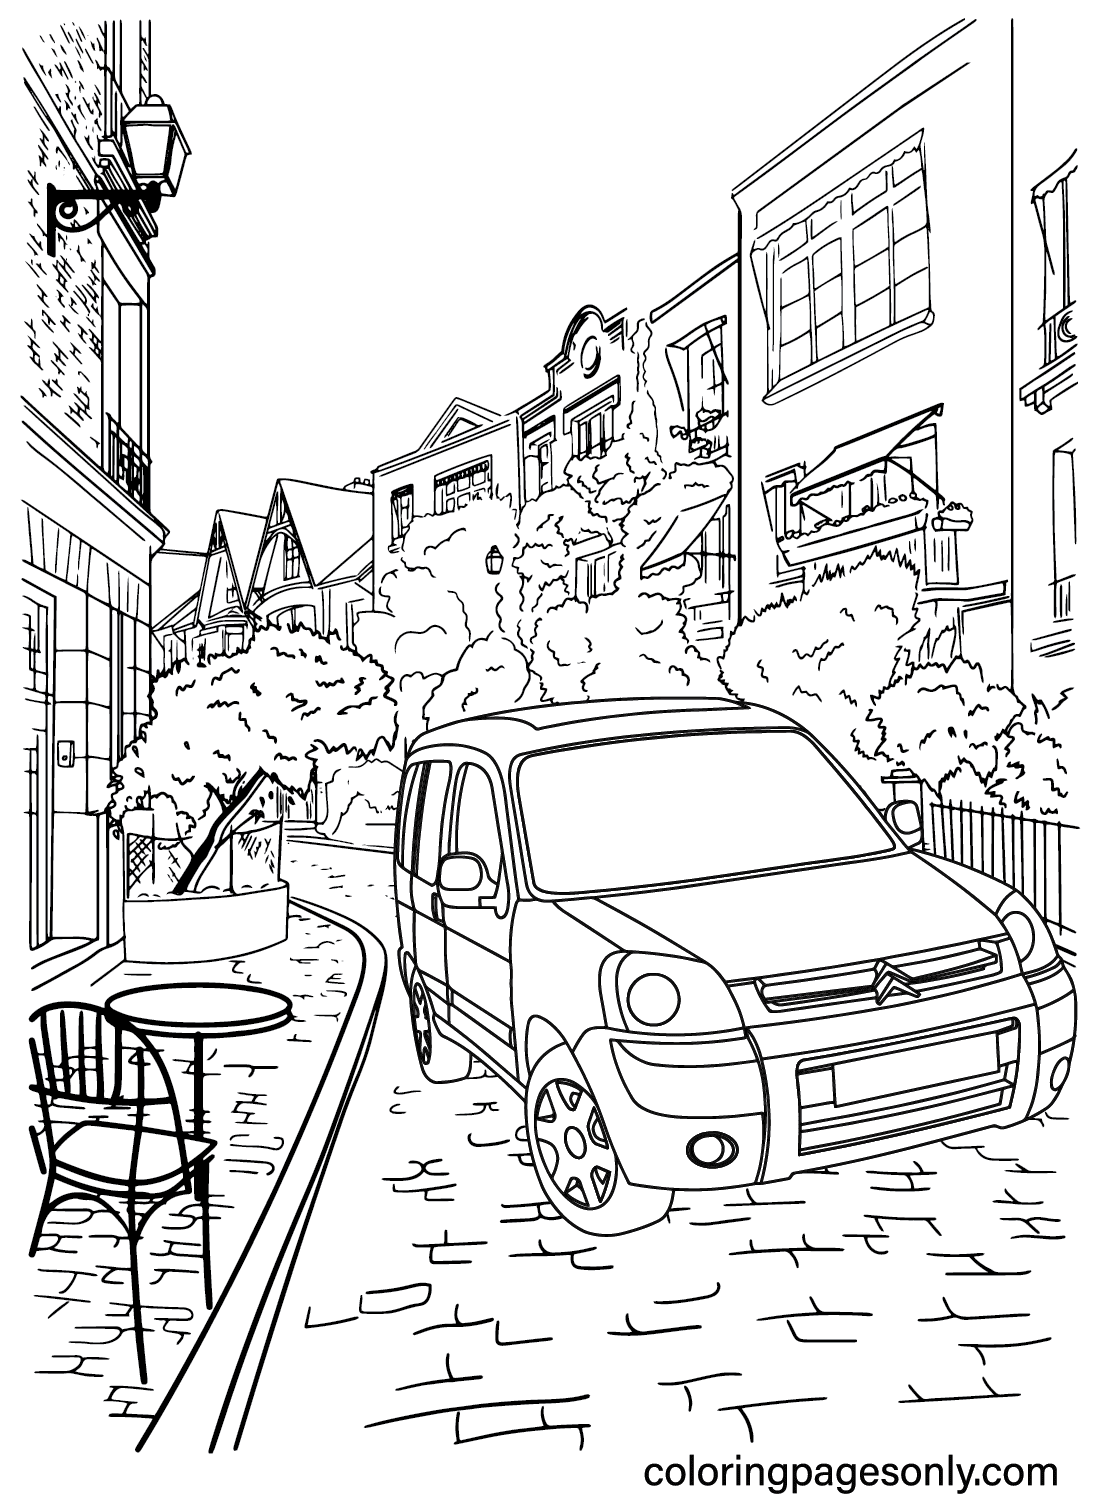 Citroen Berlingo Coloring Page from Citroën